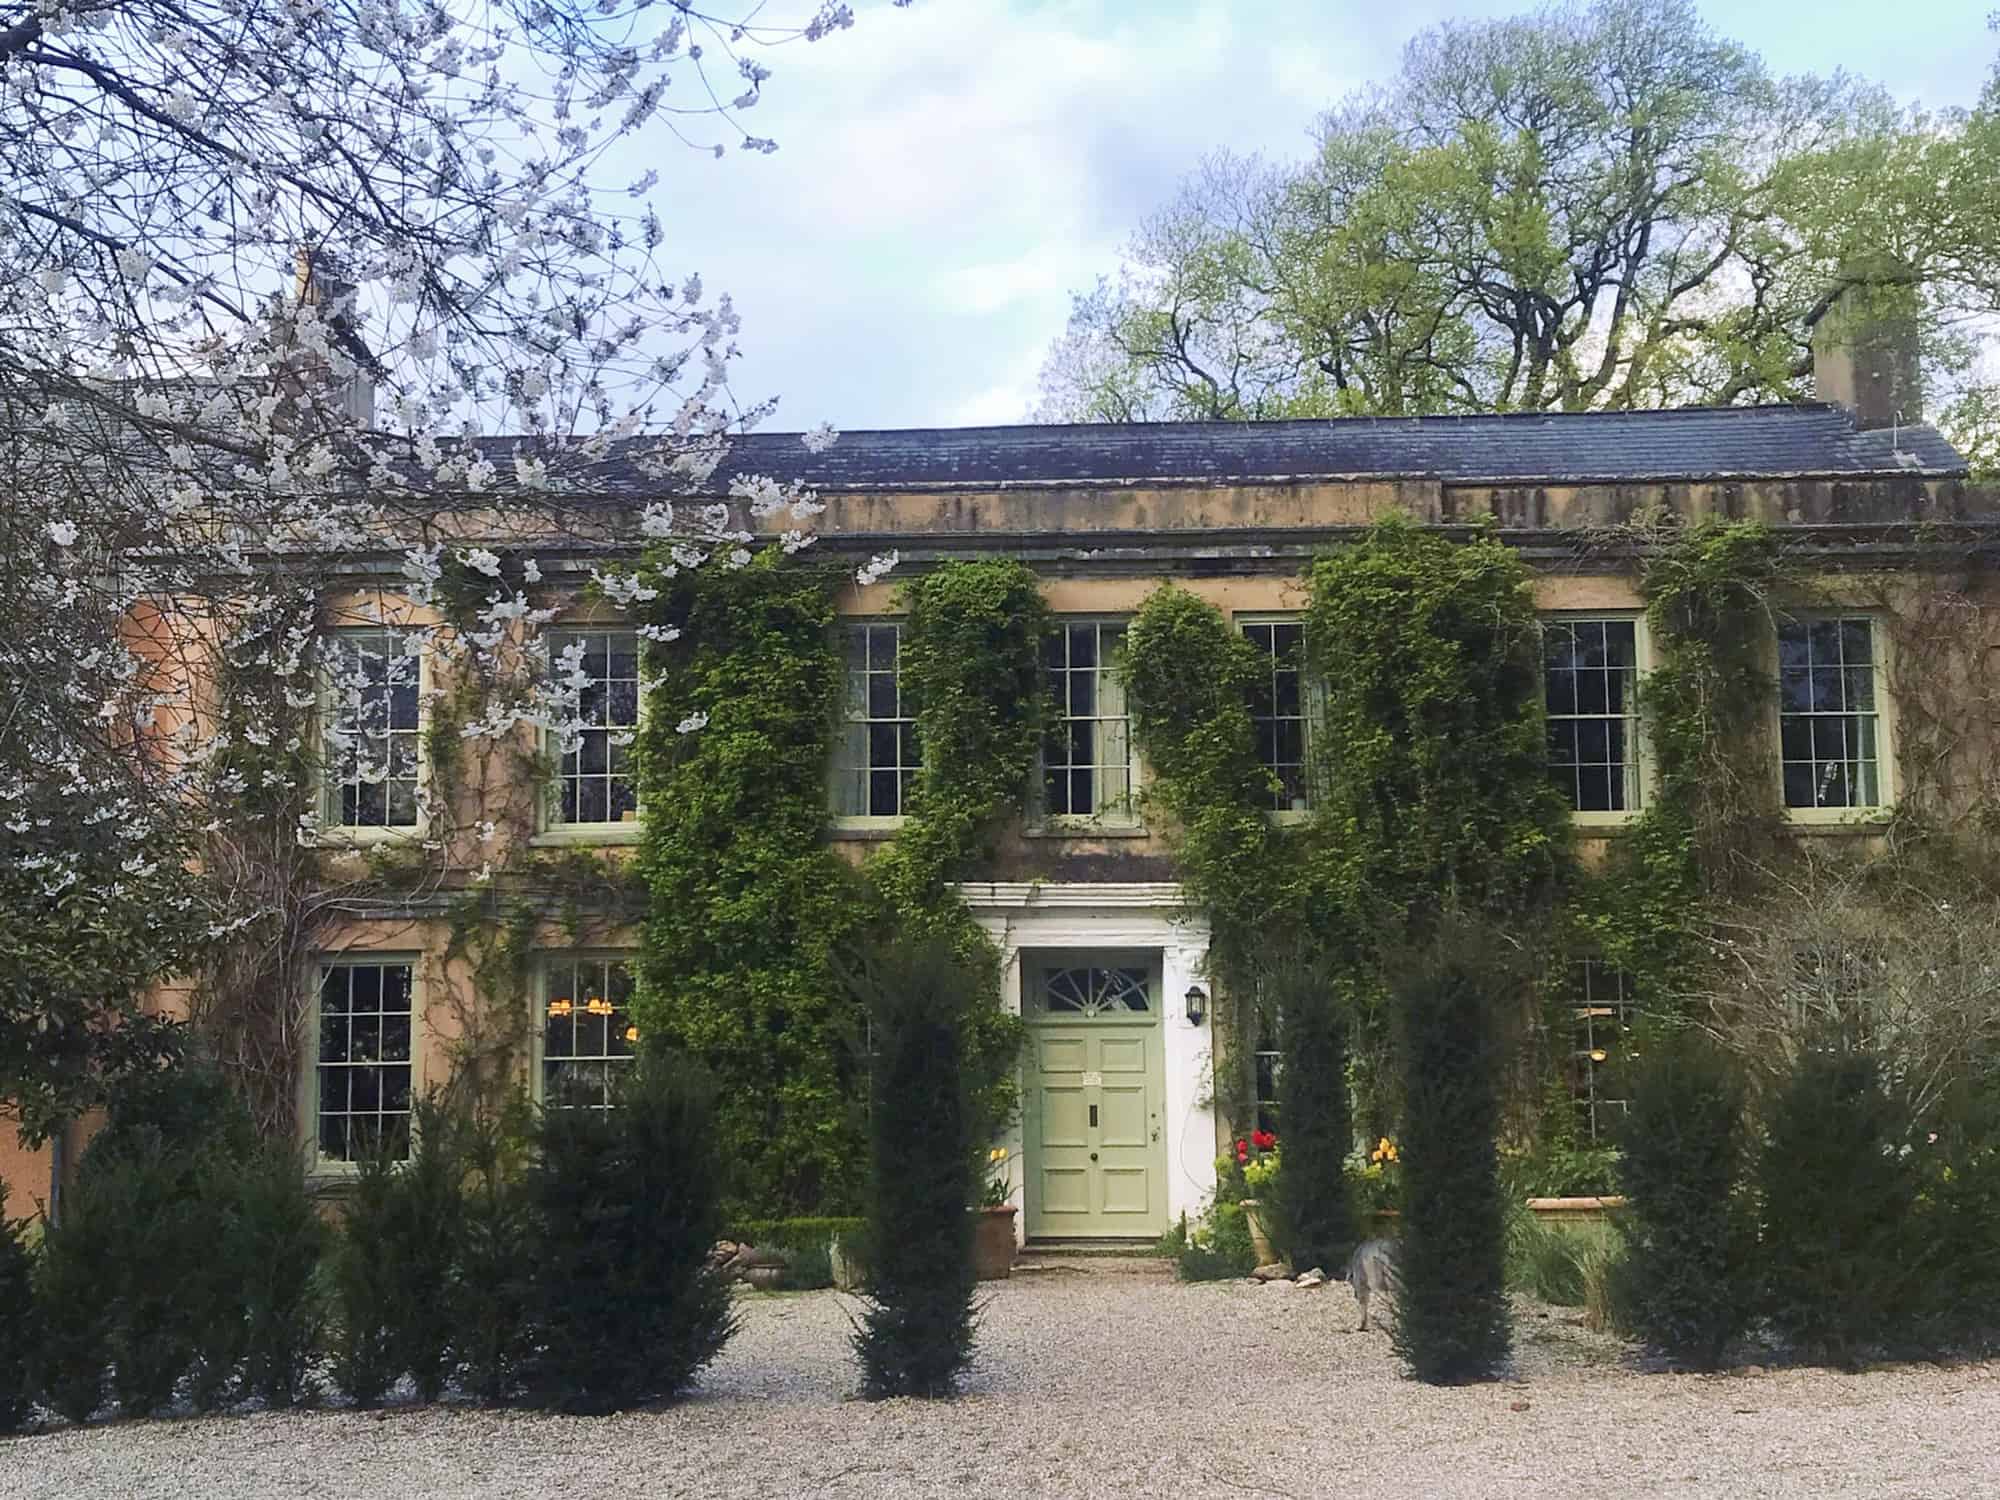 Ambrook Manor TQ12 - A beautiful country home with stunning interiors, all set in 7 acres of woodland and private gardens. Suitable for large campaign shoots - The Location Guys